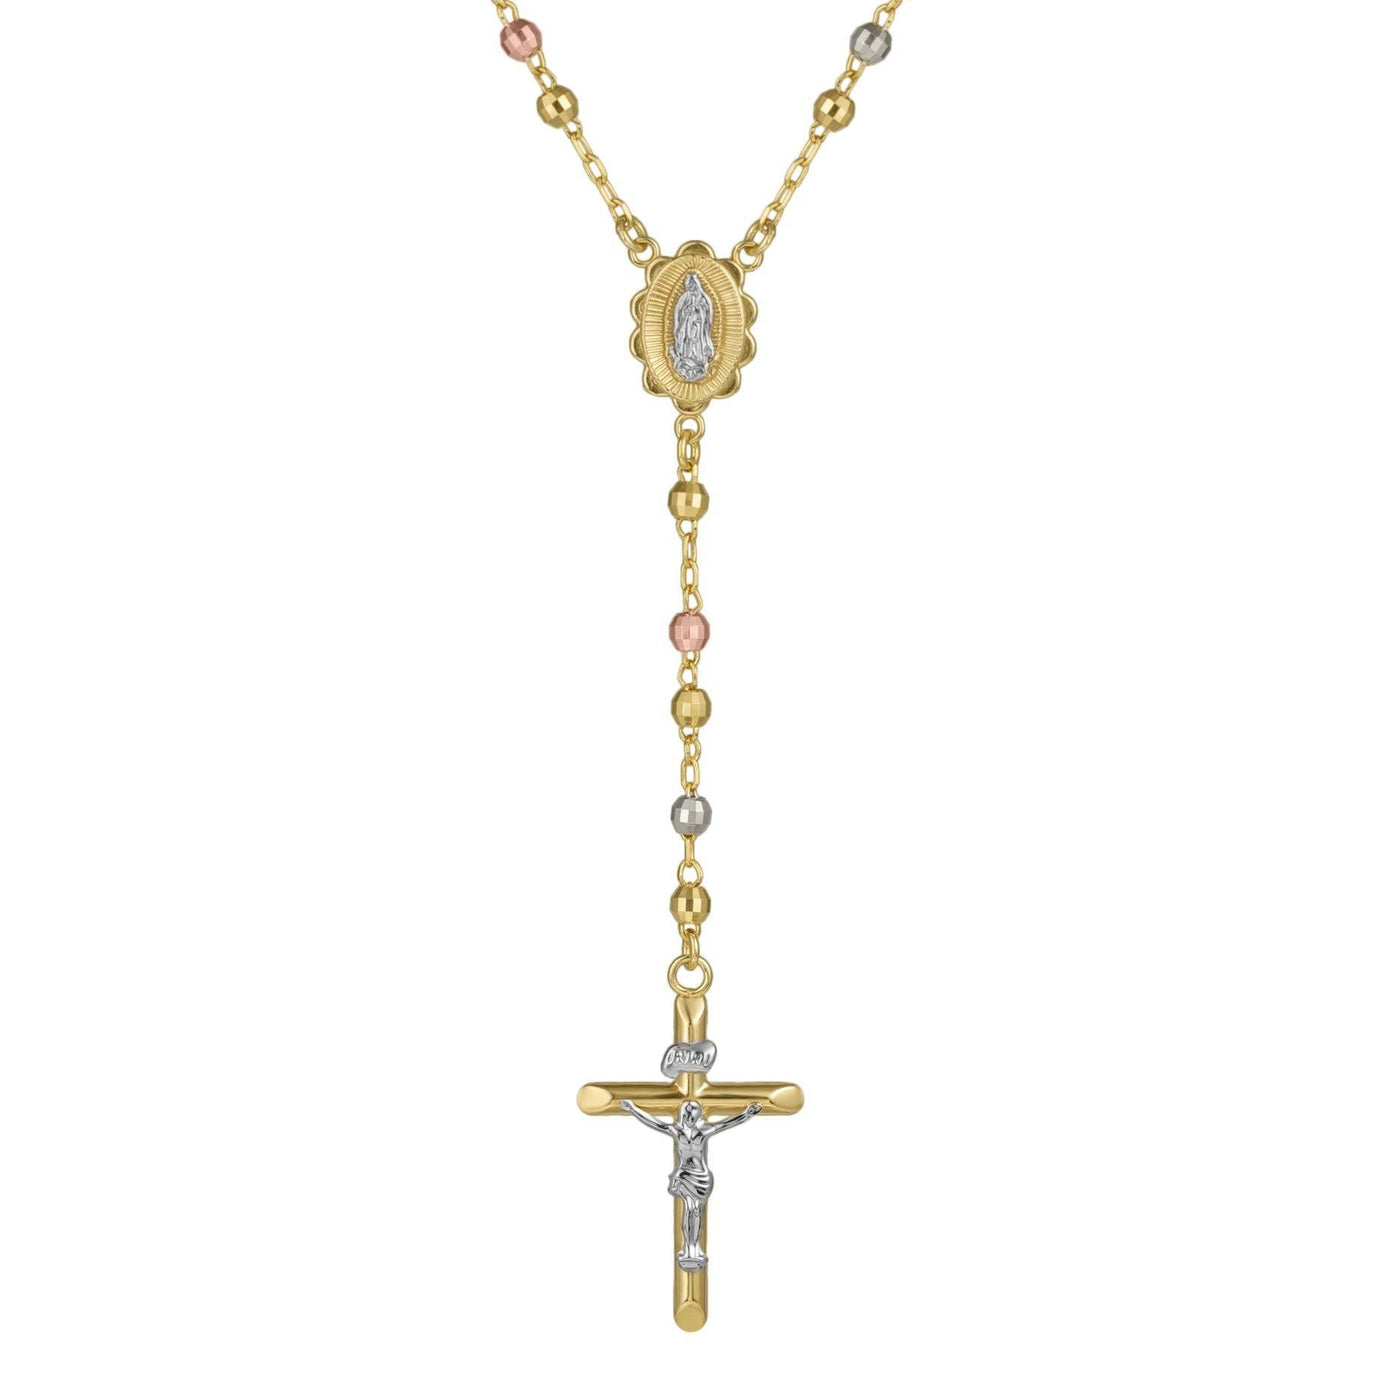 4mm Tri-Color Diamond Cut Cross Rosary Crucifix Necklace 10K Tri Color Gold - bayamjewelry